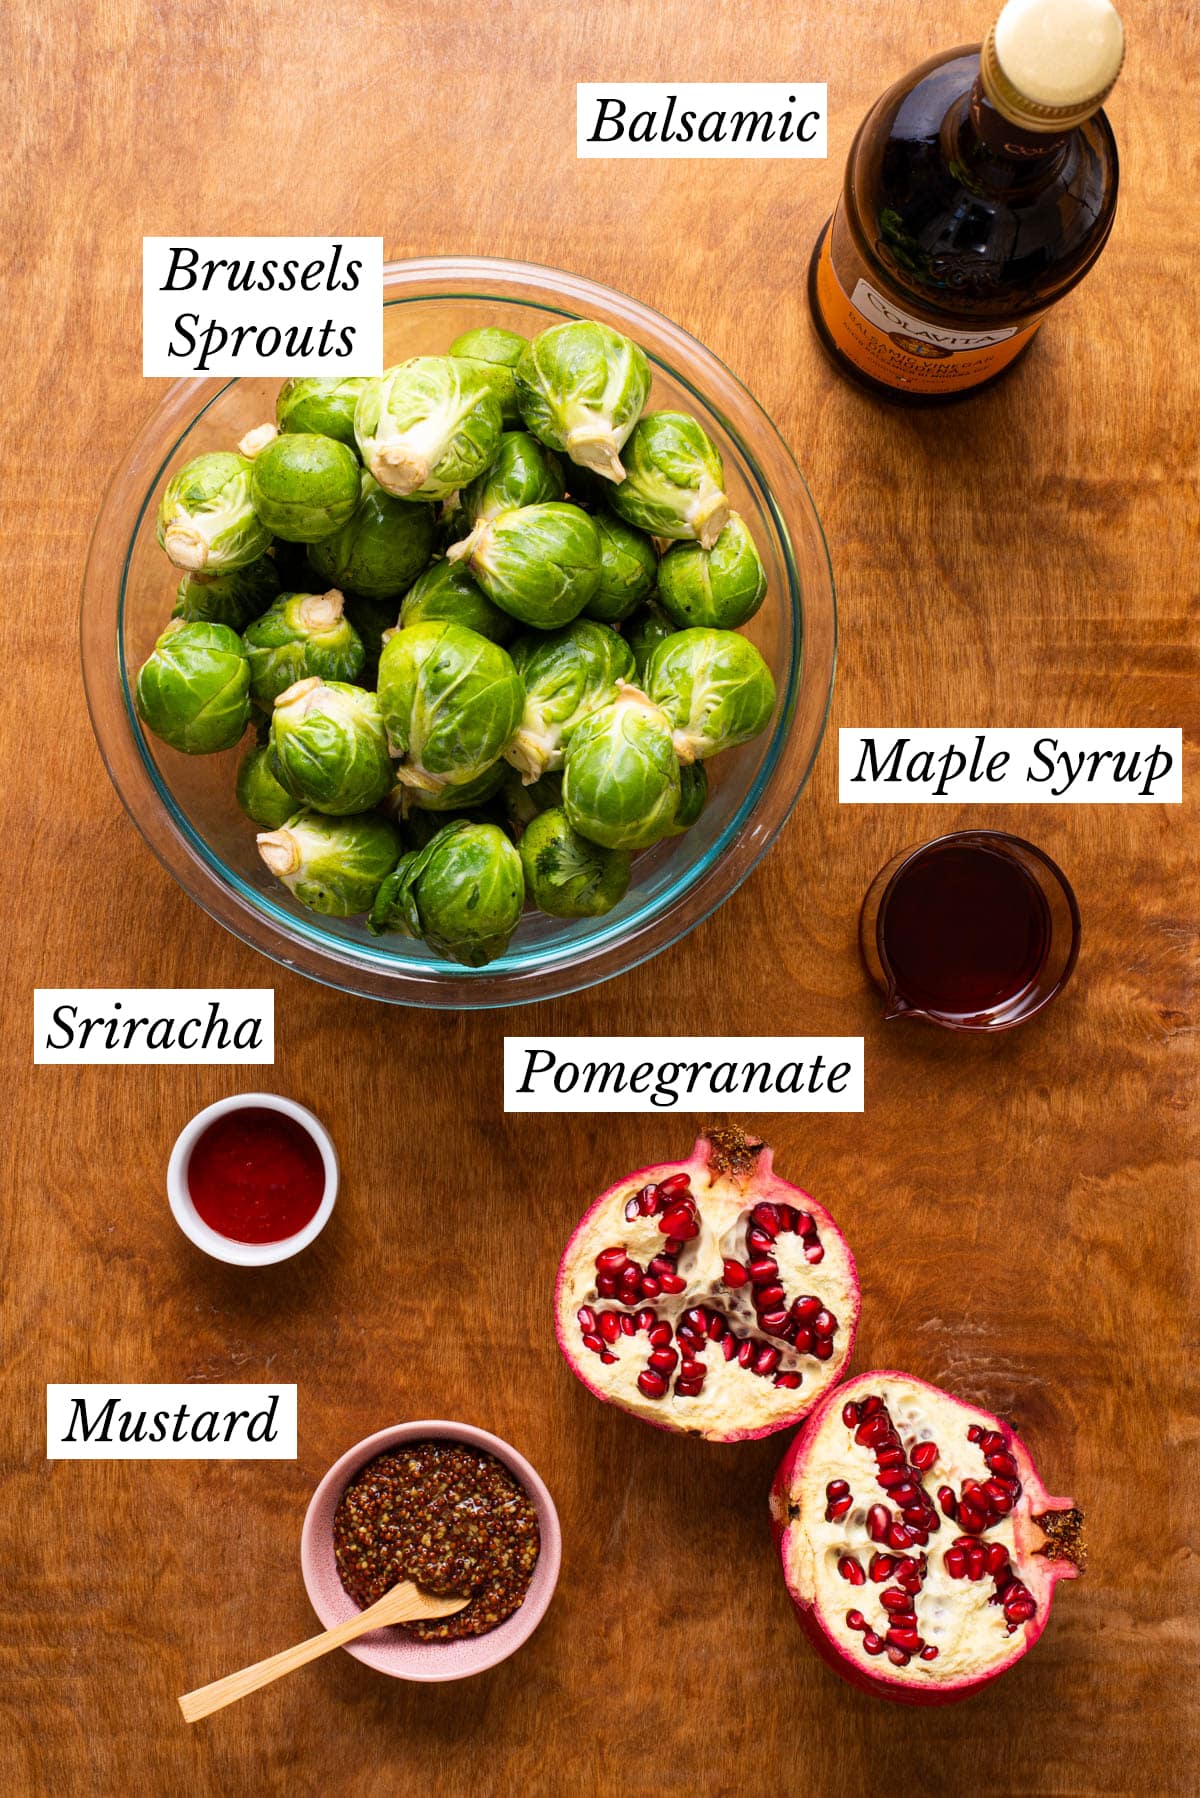 Ingredients gathered to make roasted balsamic Brussels sprouts.